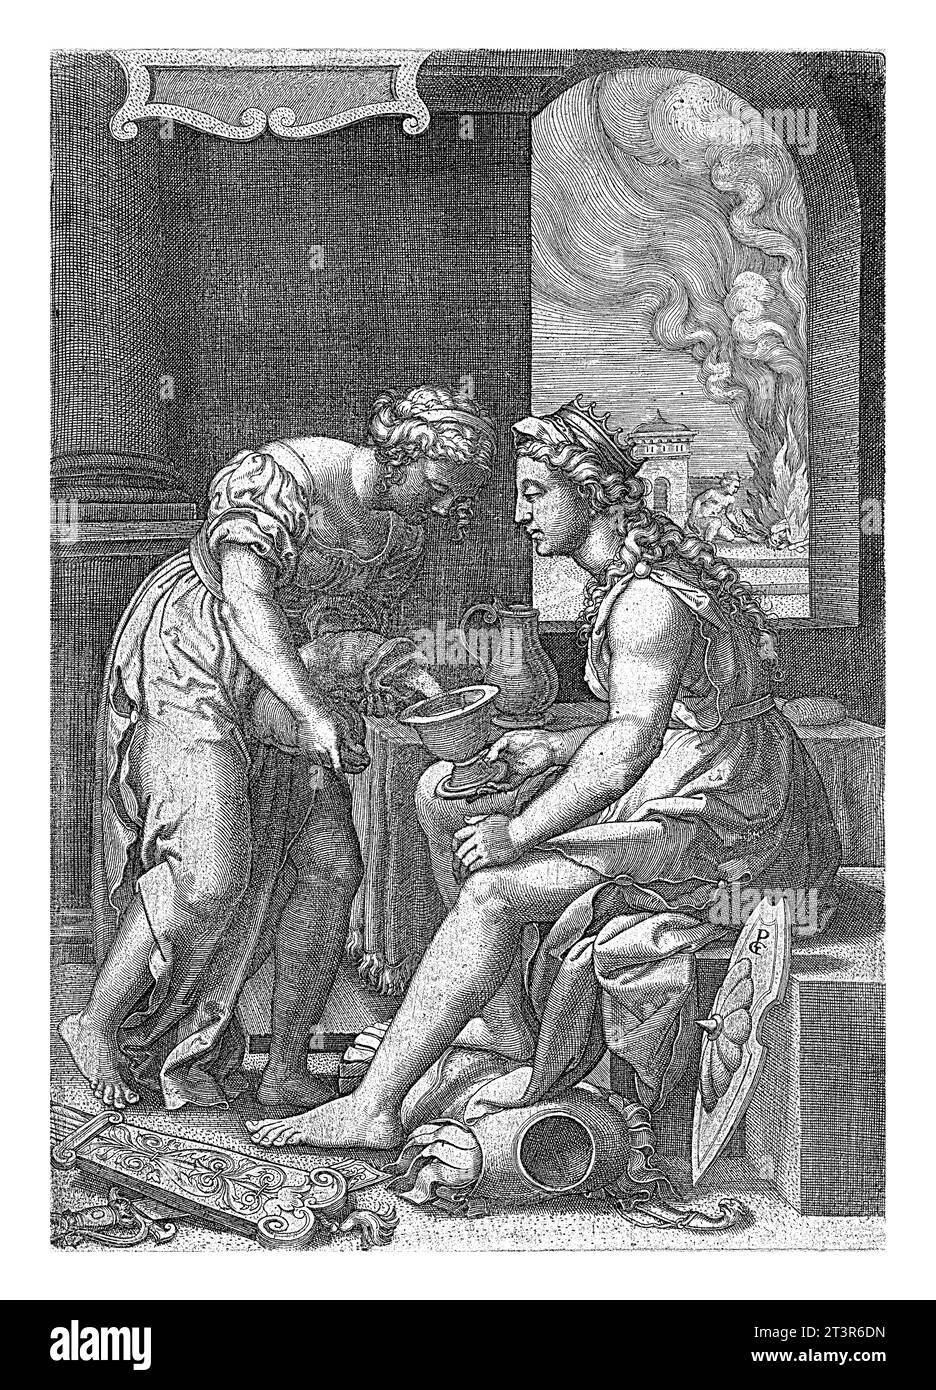 Artimesia drinks the ashes of her husband Mausolus, Georg Pencz, 1537 - 1541 Artemisia sits by the armor of her deceased husband and is served by a se Stock Photo